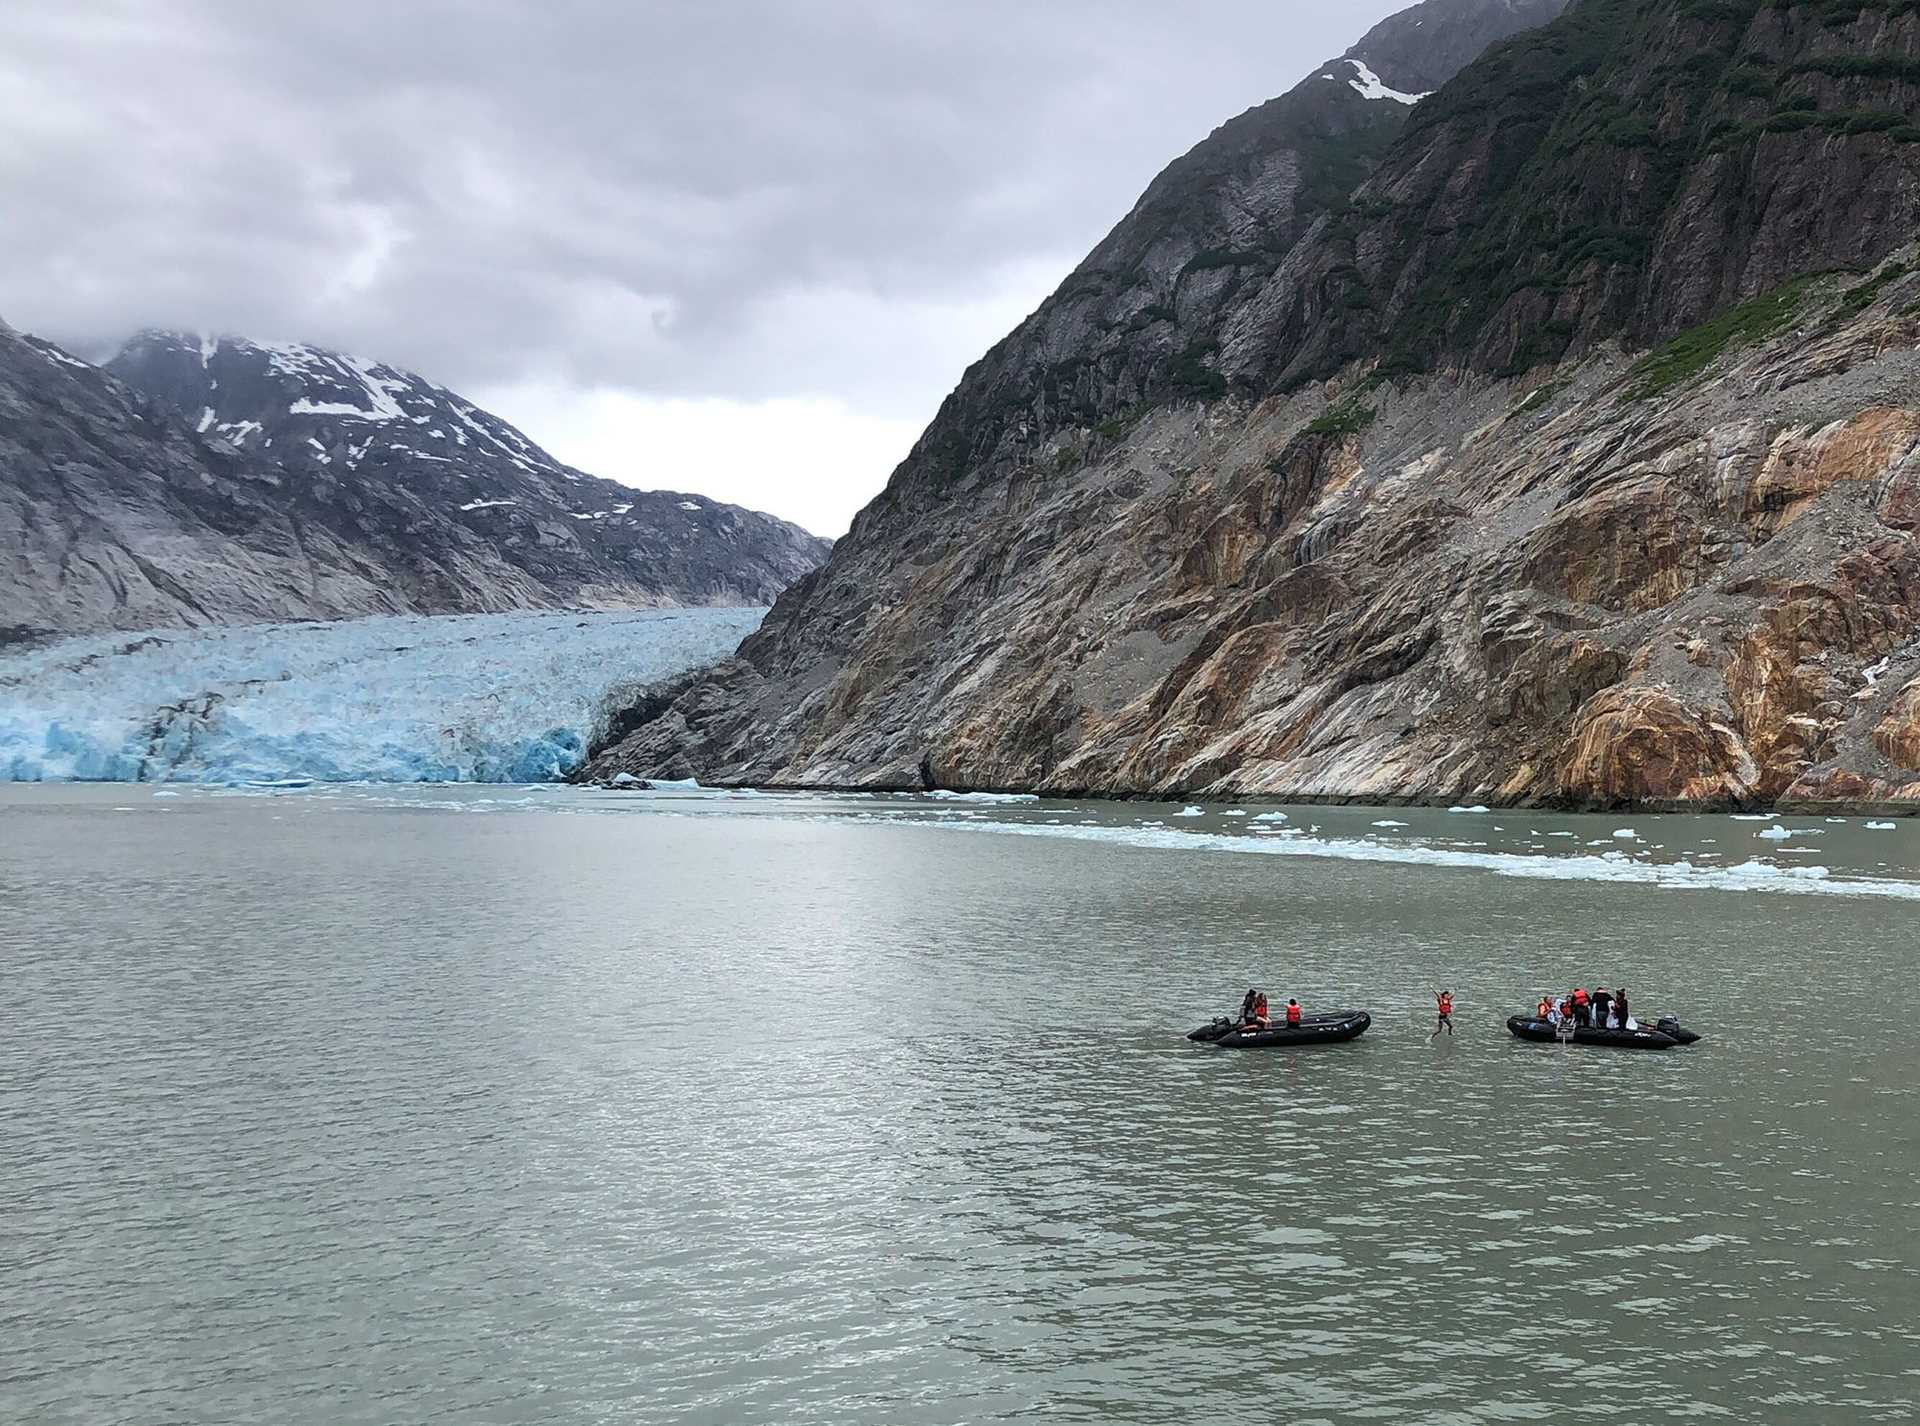 a person in a red jacket jumps off a zodiac in front of a large glacier